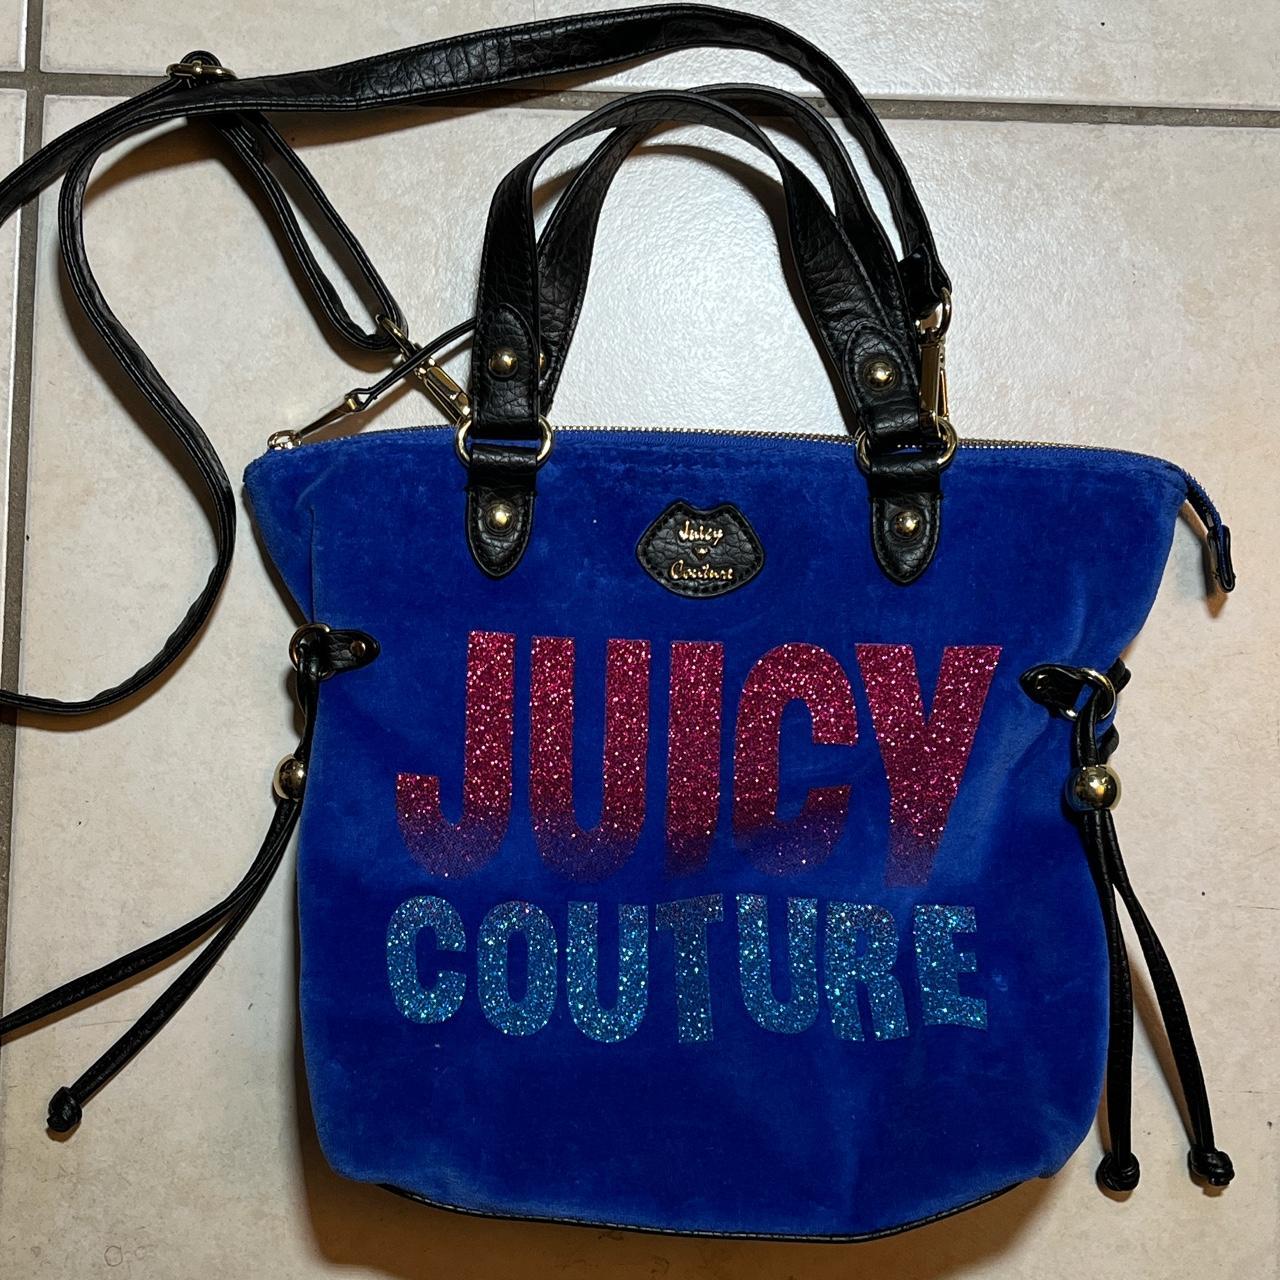 Sell Juicy Couture Baby Diaper Blue Bags.(id:2005392) from Guangzhou  Handbagmaker Co.,Ltd. - EC21 Mobile